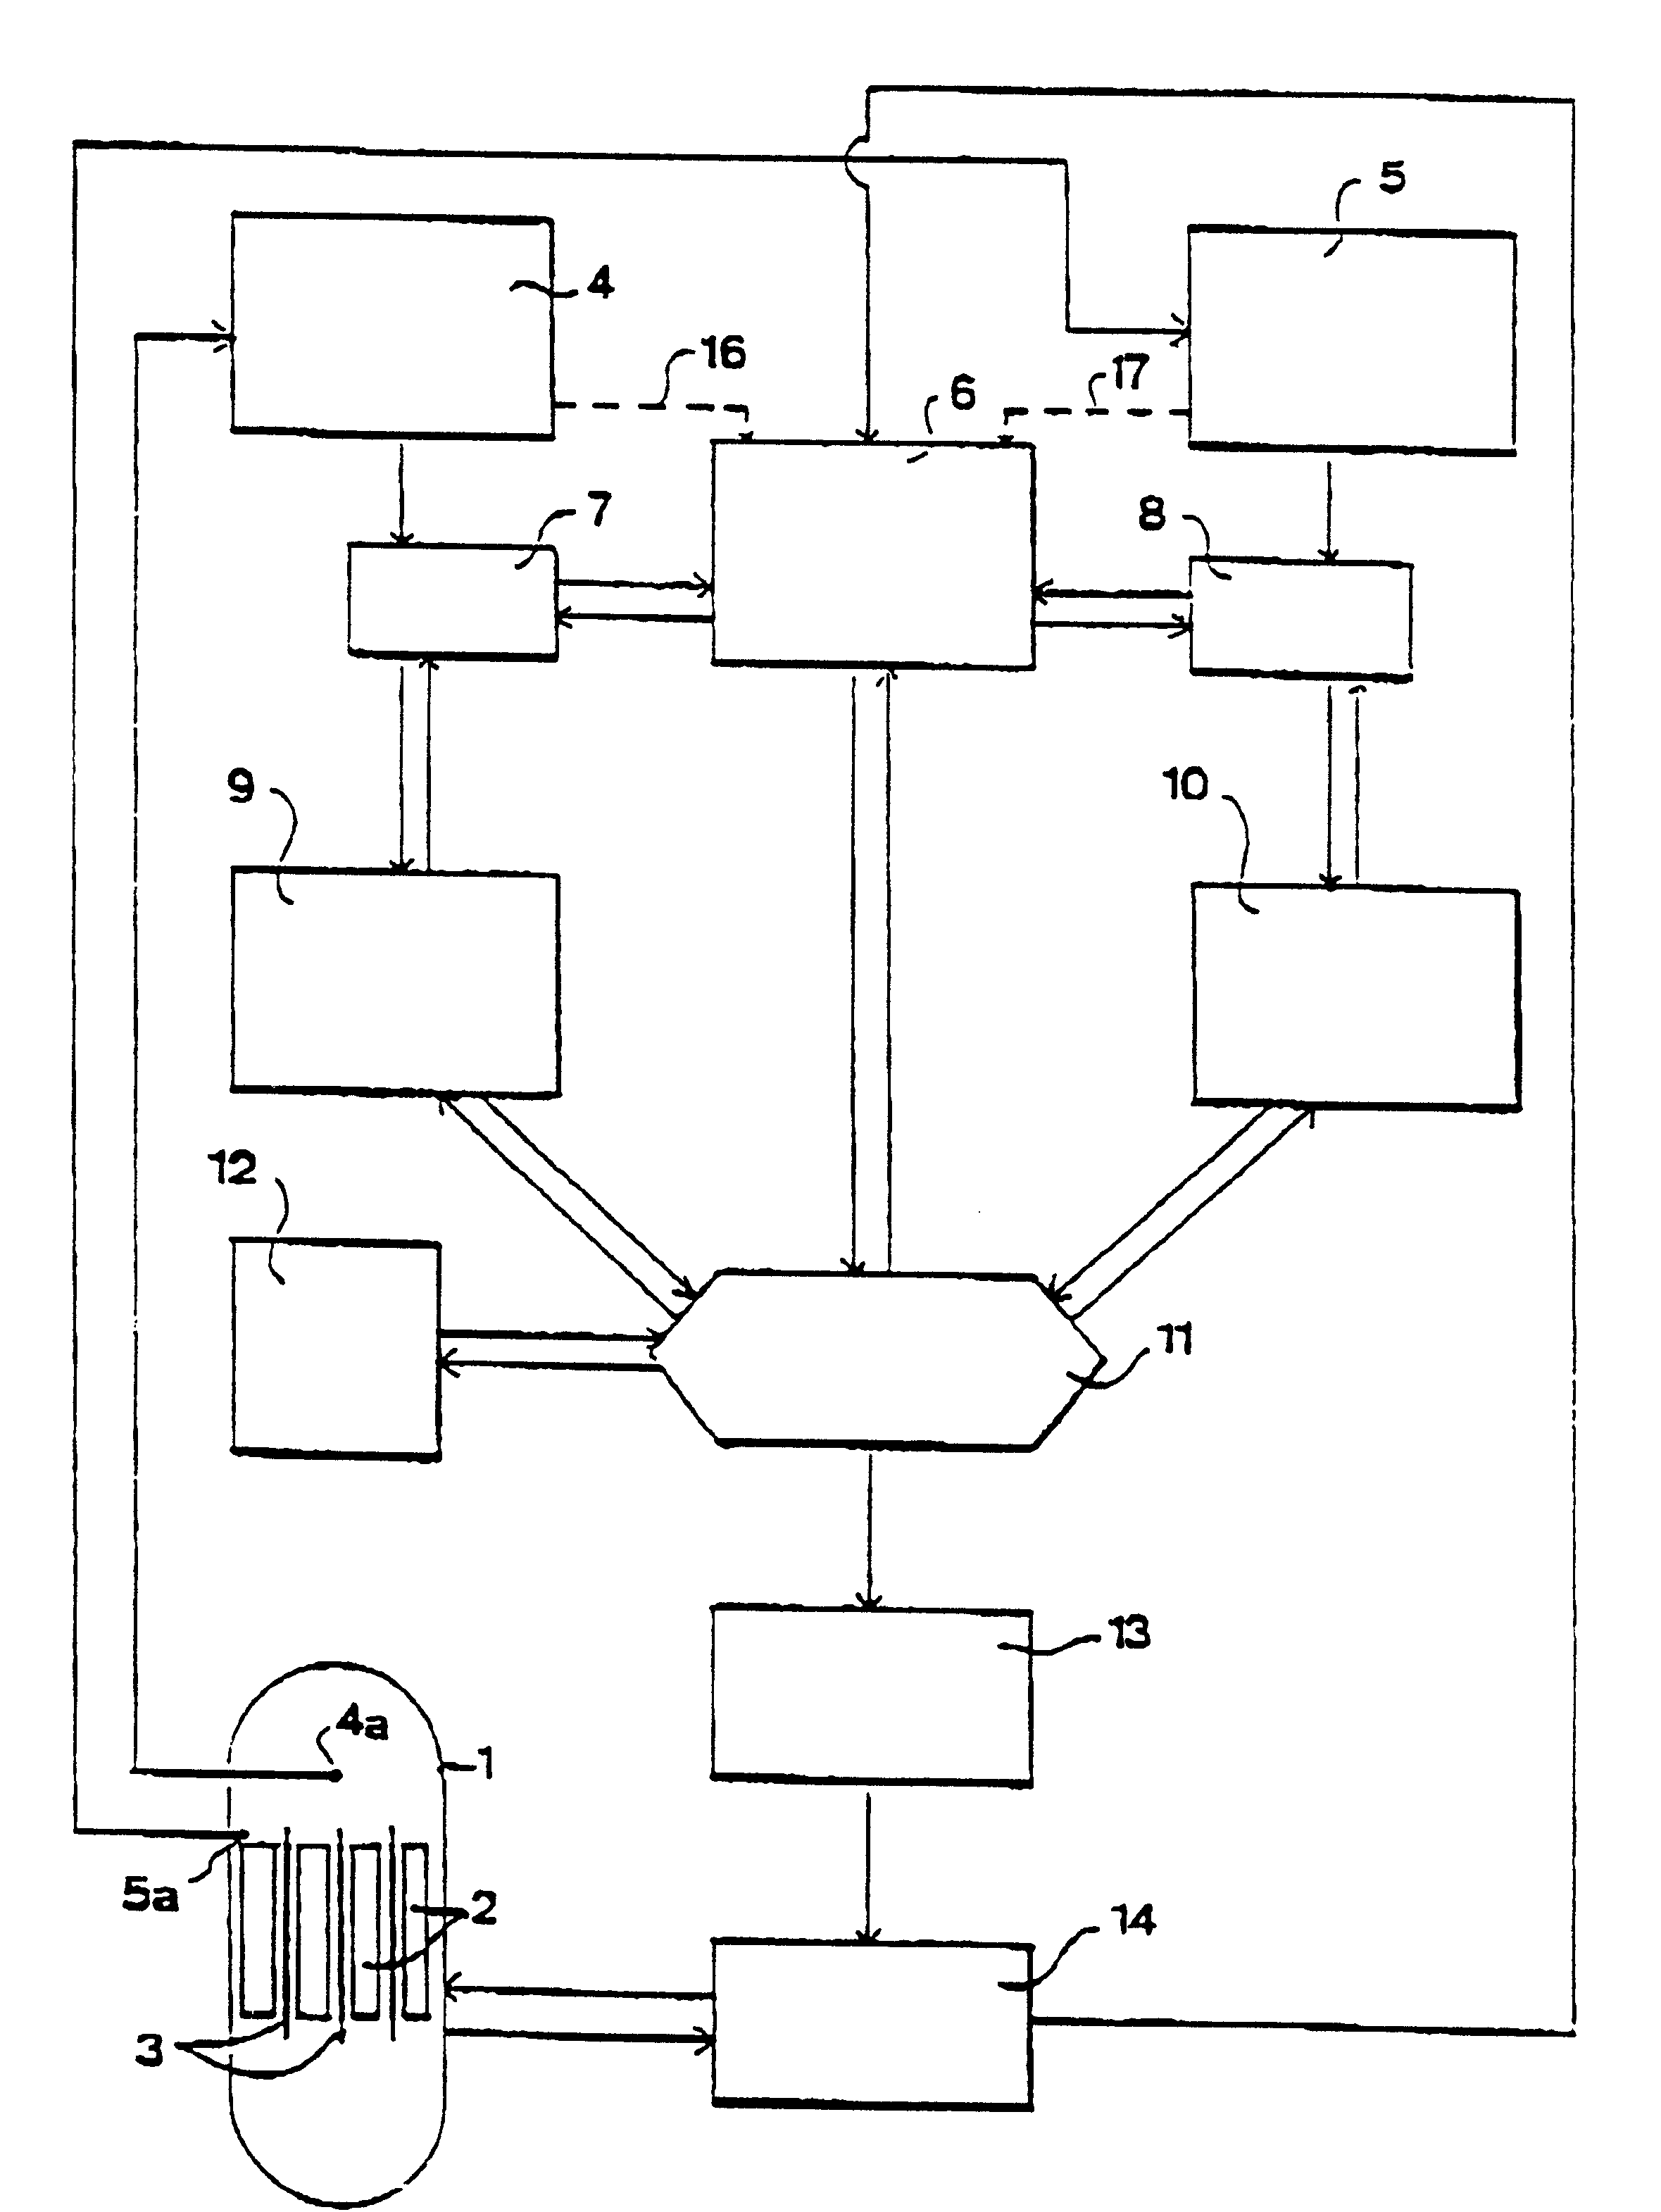 Method and a device for evaluating the integrity of the nuclear fuel in a nuclear plant